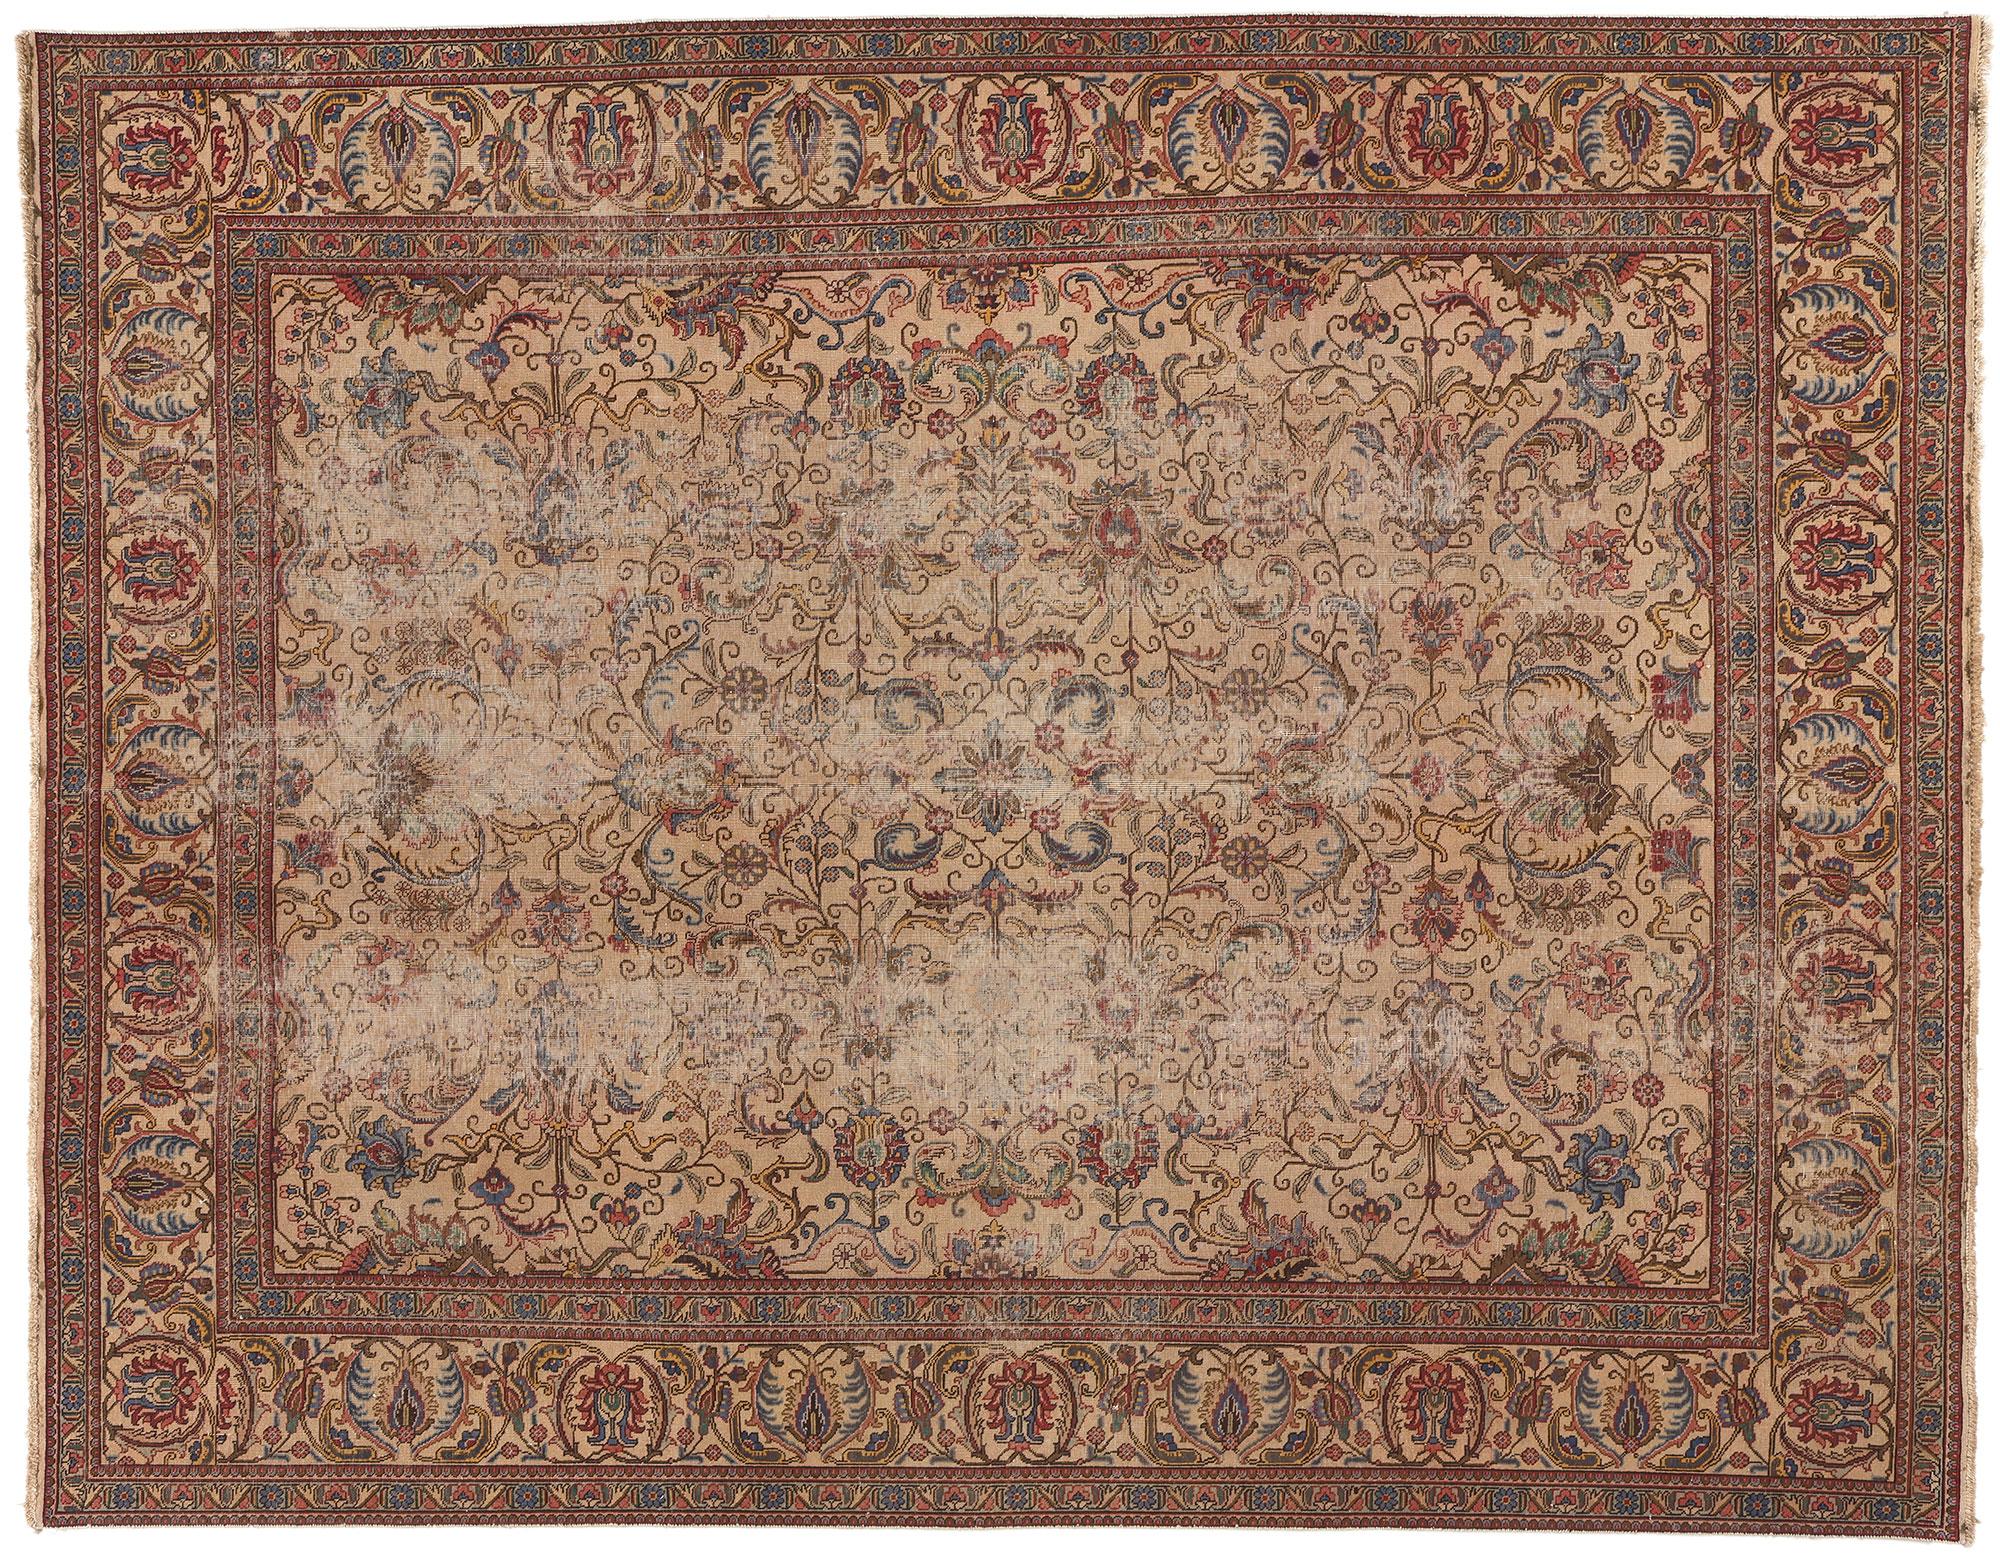 Antique-Worn Persian Tabriz Rug, Weathered Beauty Meets Rustic Sensibility For Sale 1